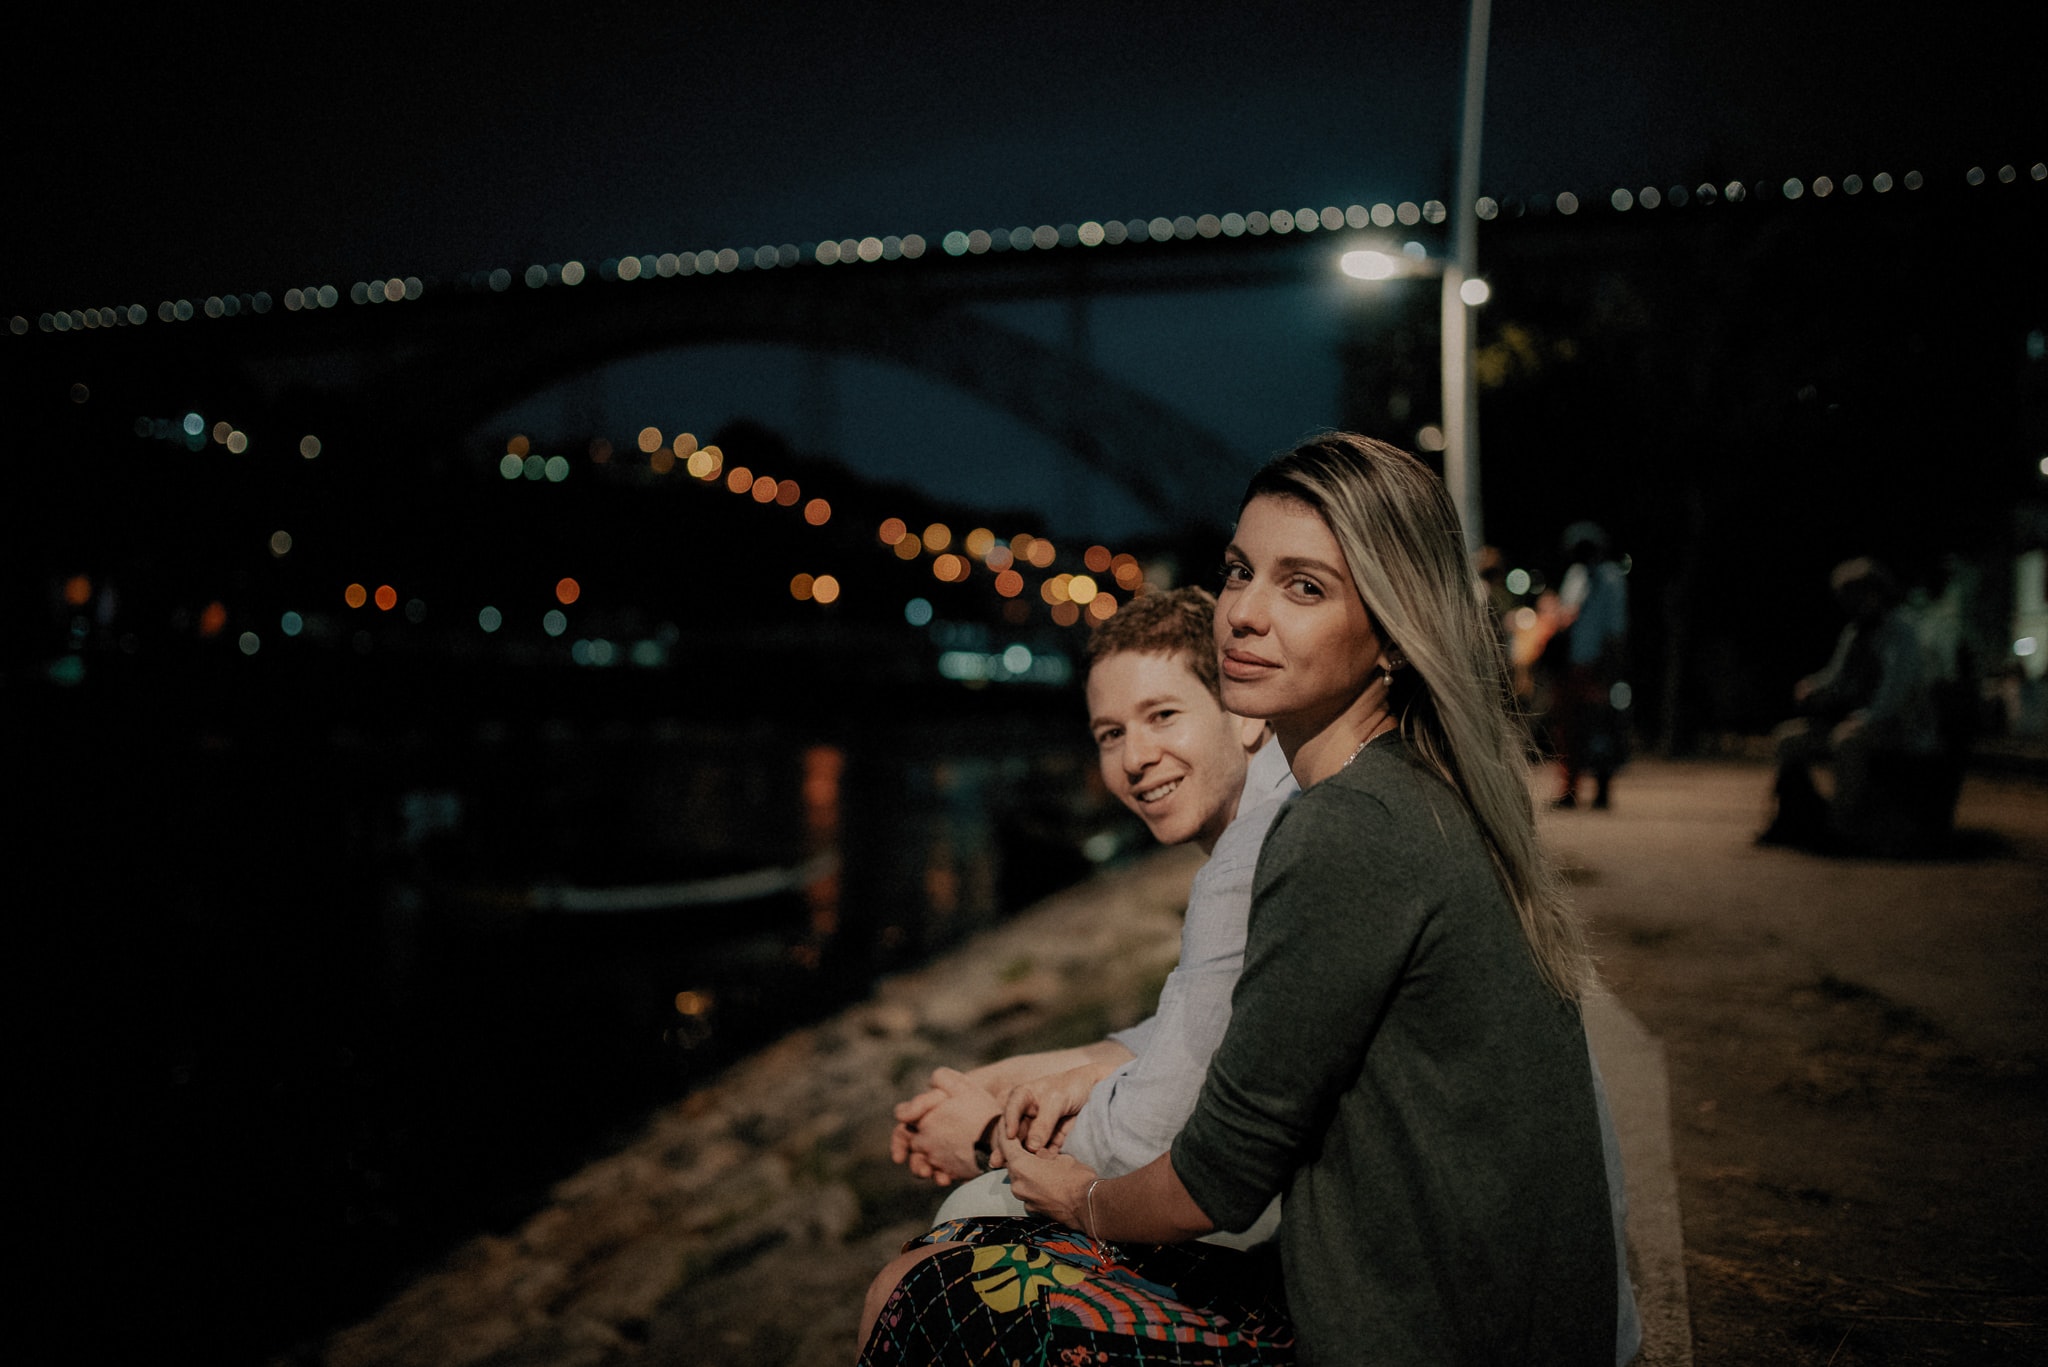 Porto engagement session by the Douro river